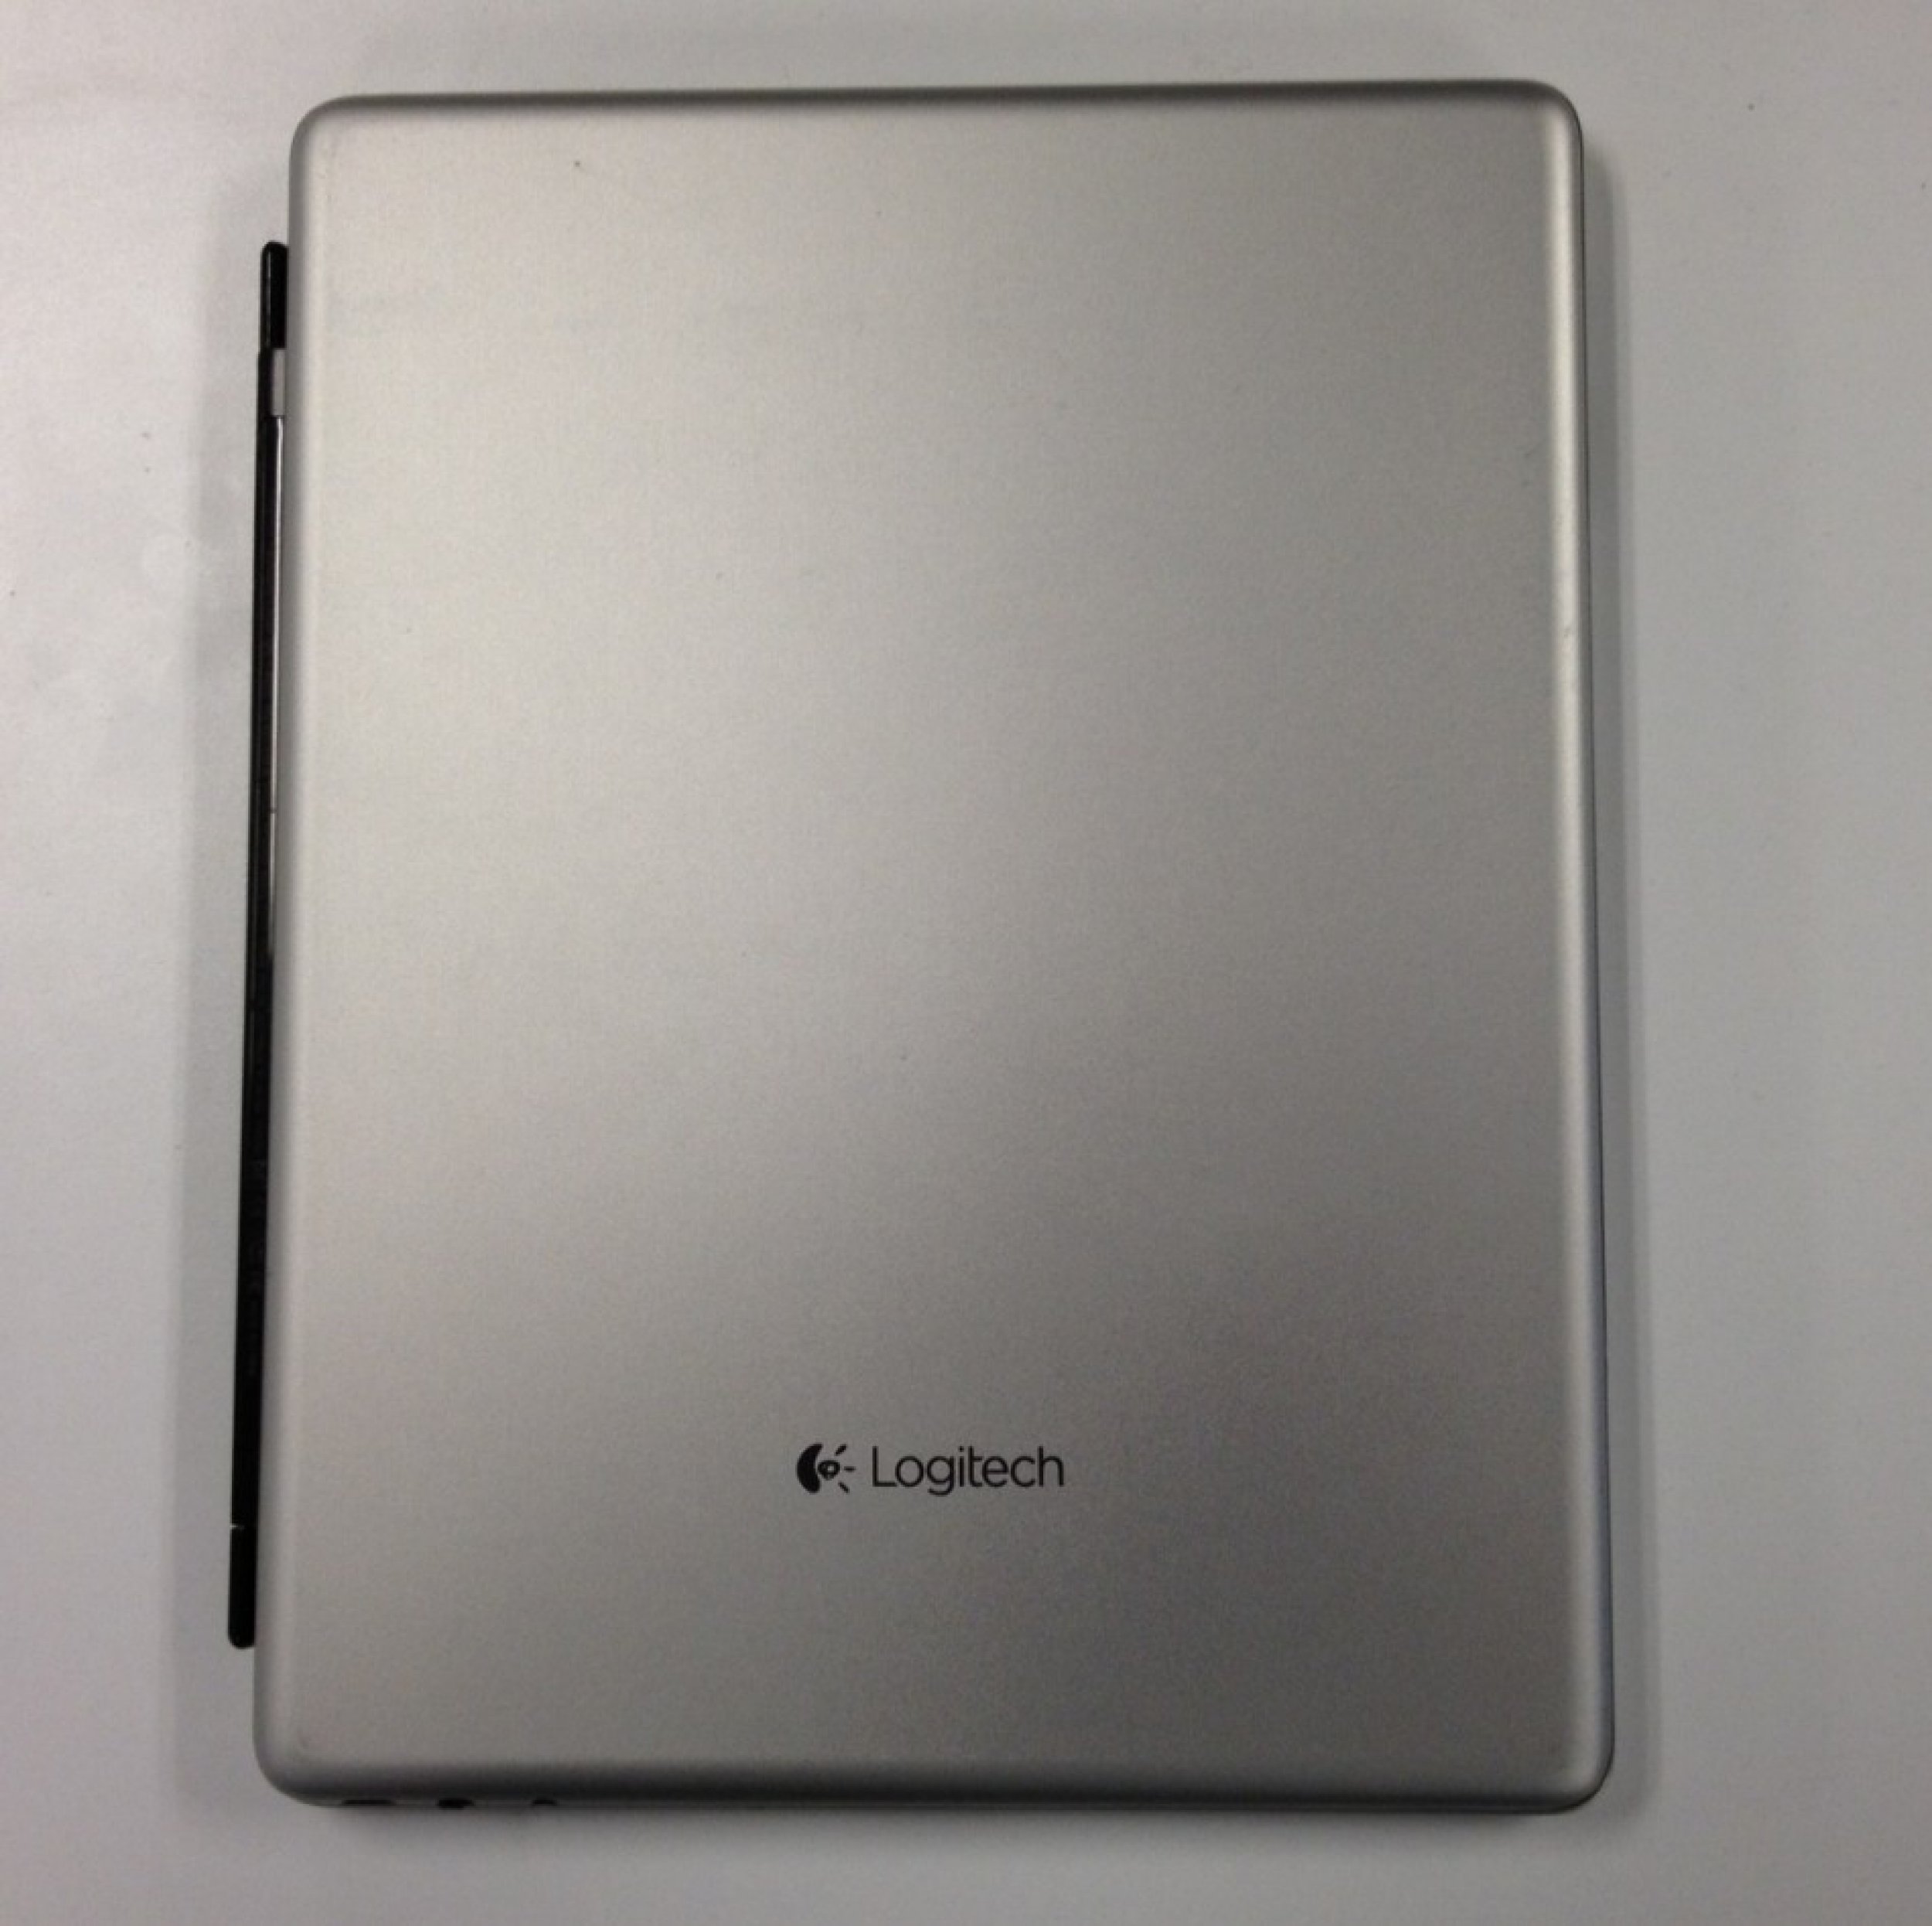 The Best Apple iPad Accessory Ever Meet The Ultrathin Keyboard Cover From Logitech